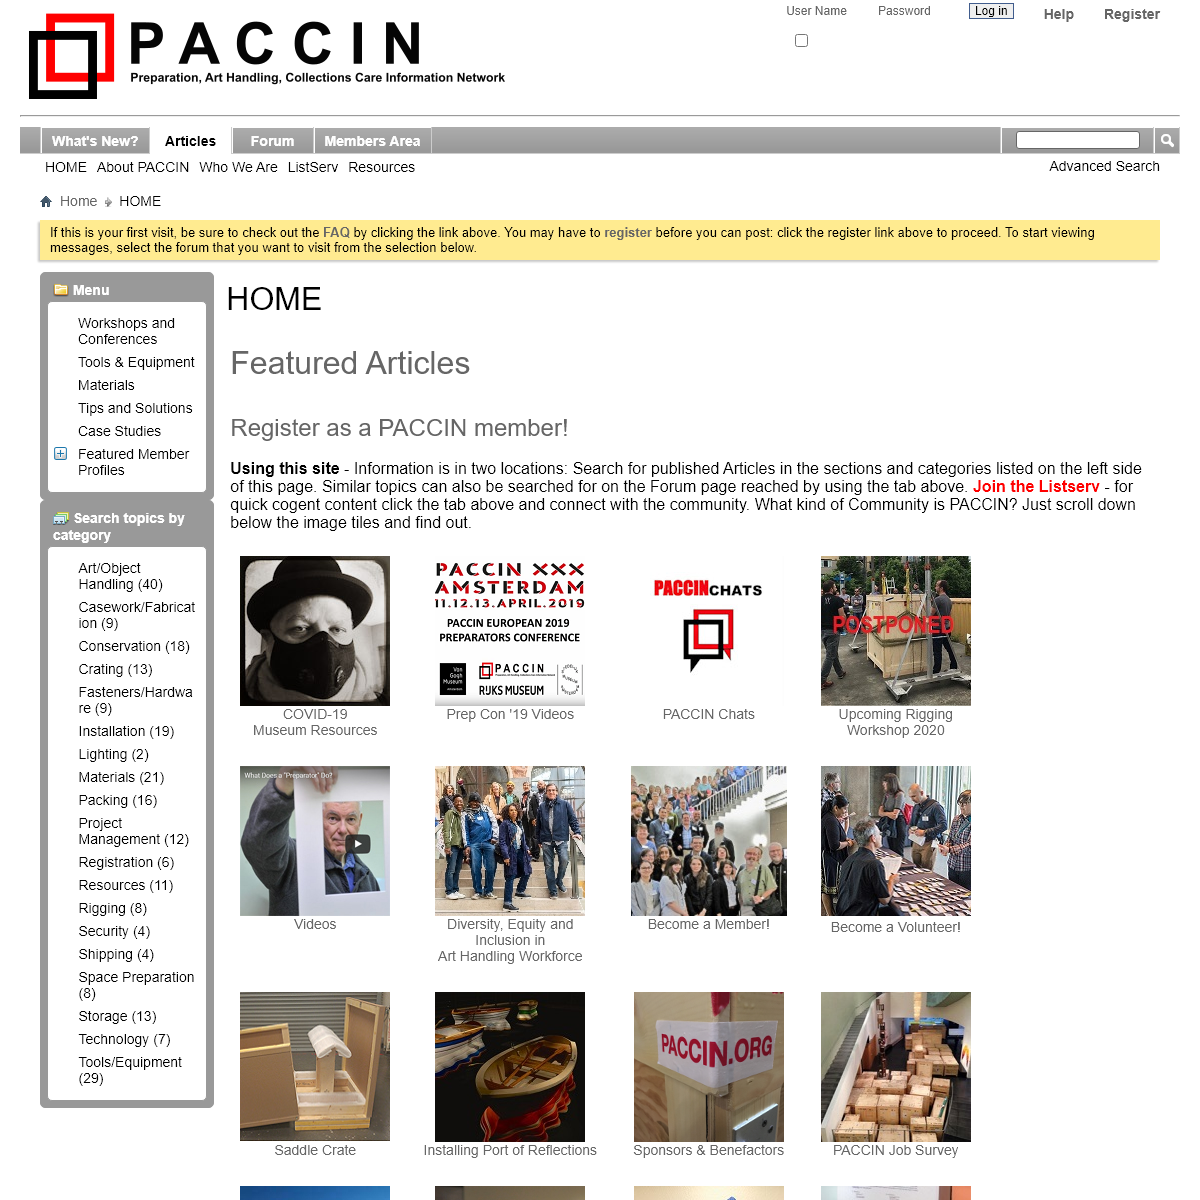 A complete backup of paccin.org